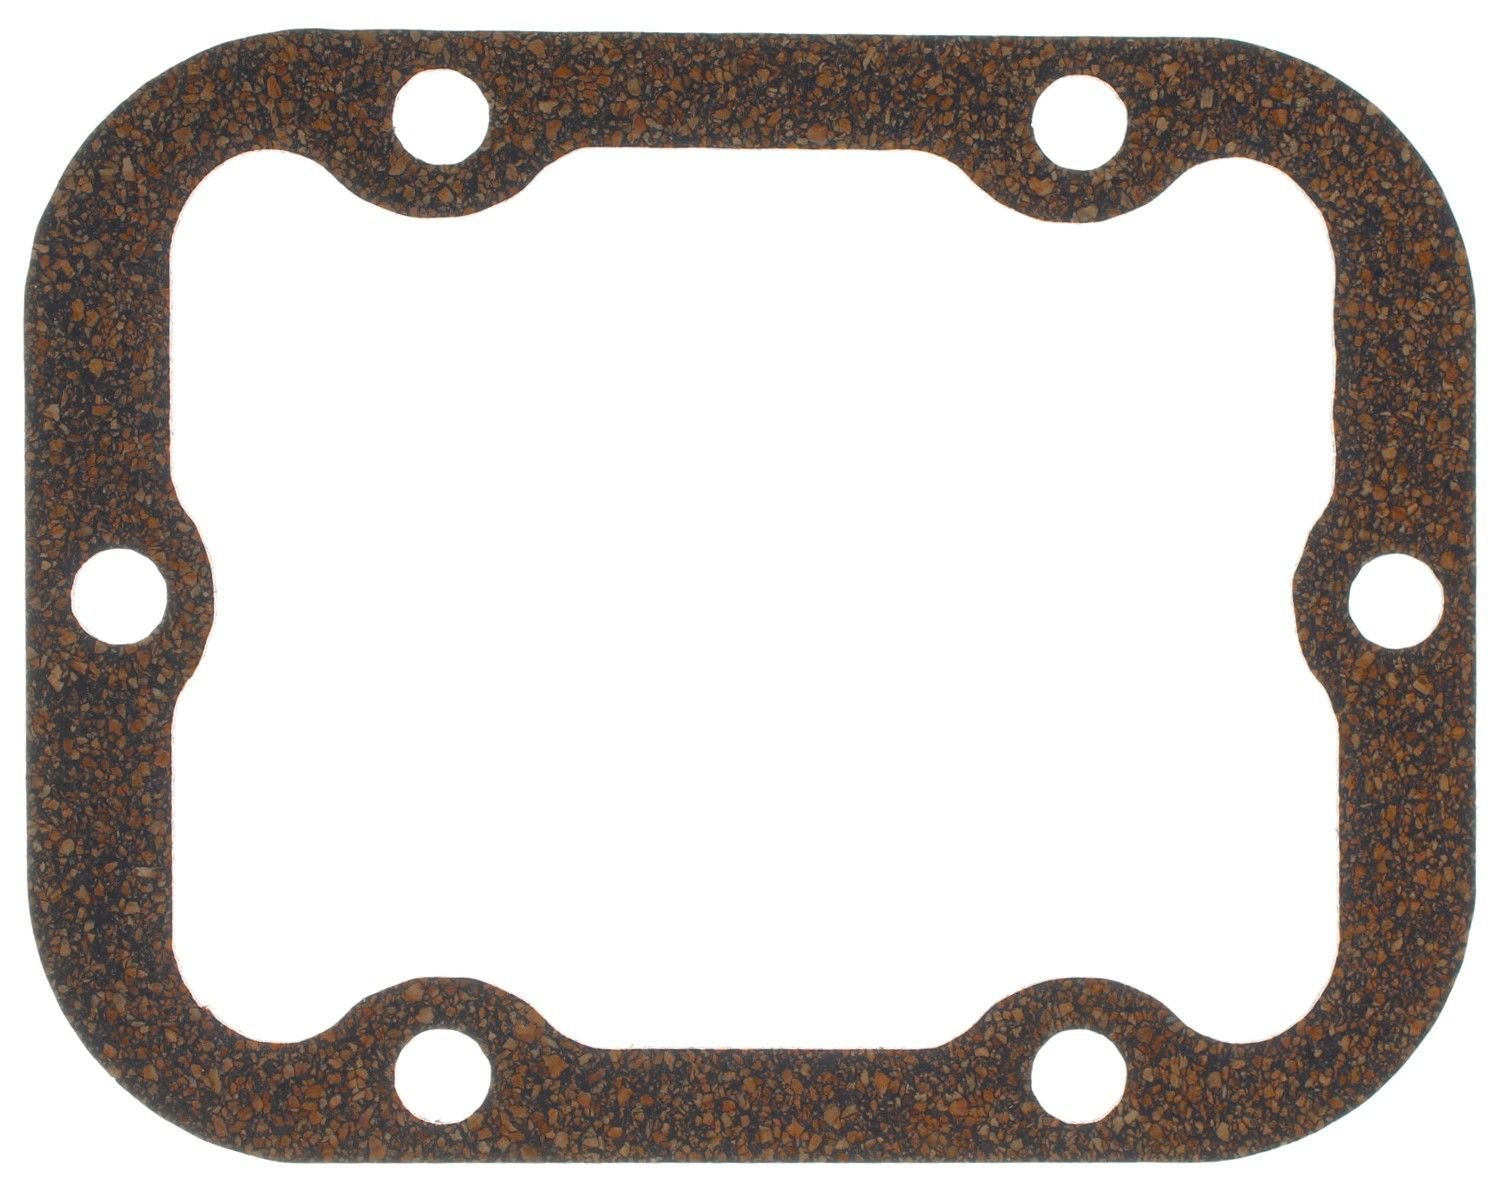 MAHLE ORIGINAL - Automatic Transmission Power Take Off (PTO) Gasket - MHL H36080